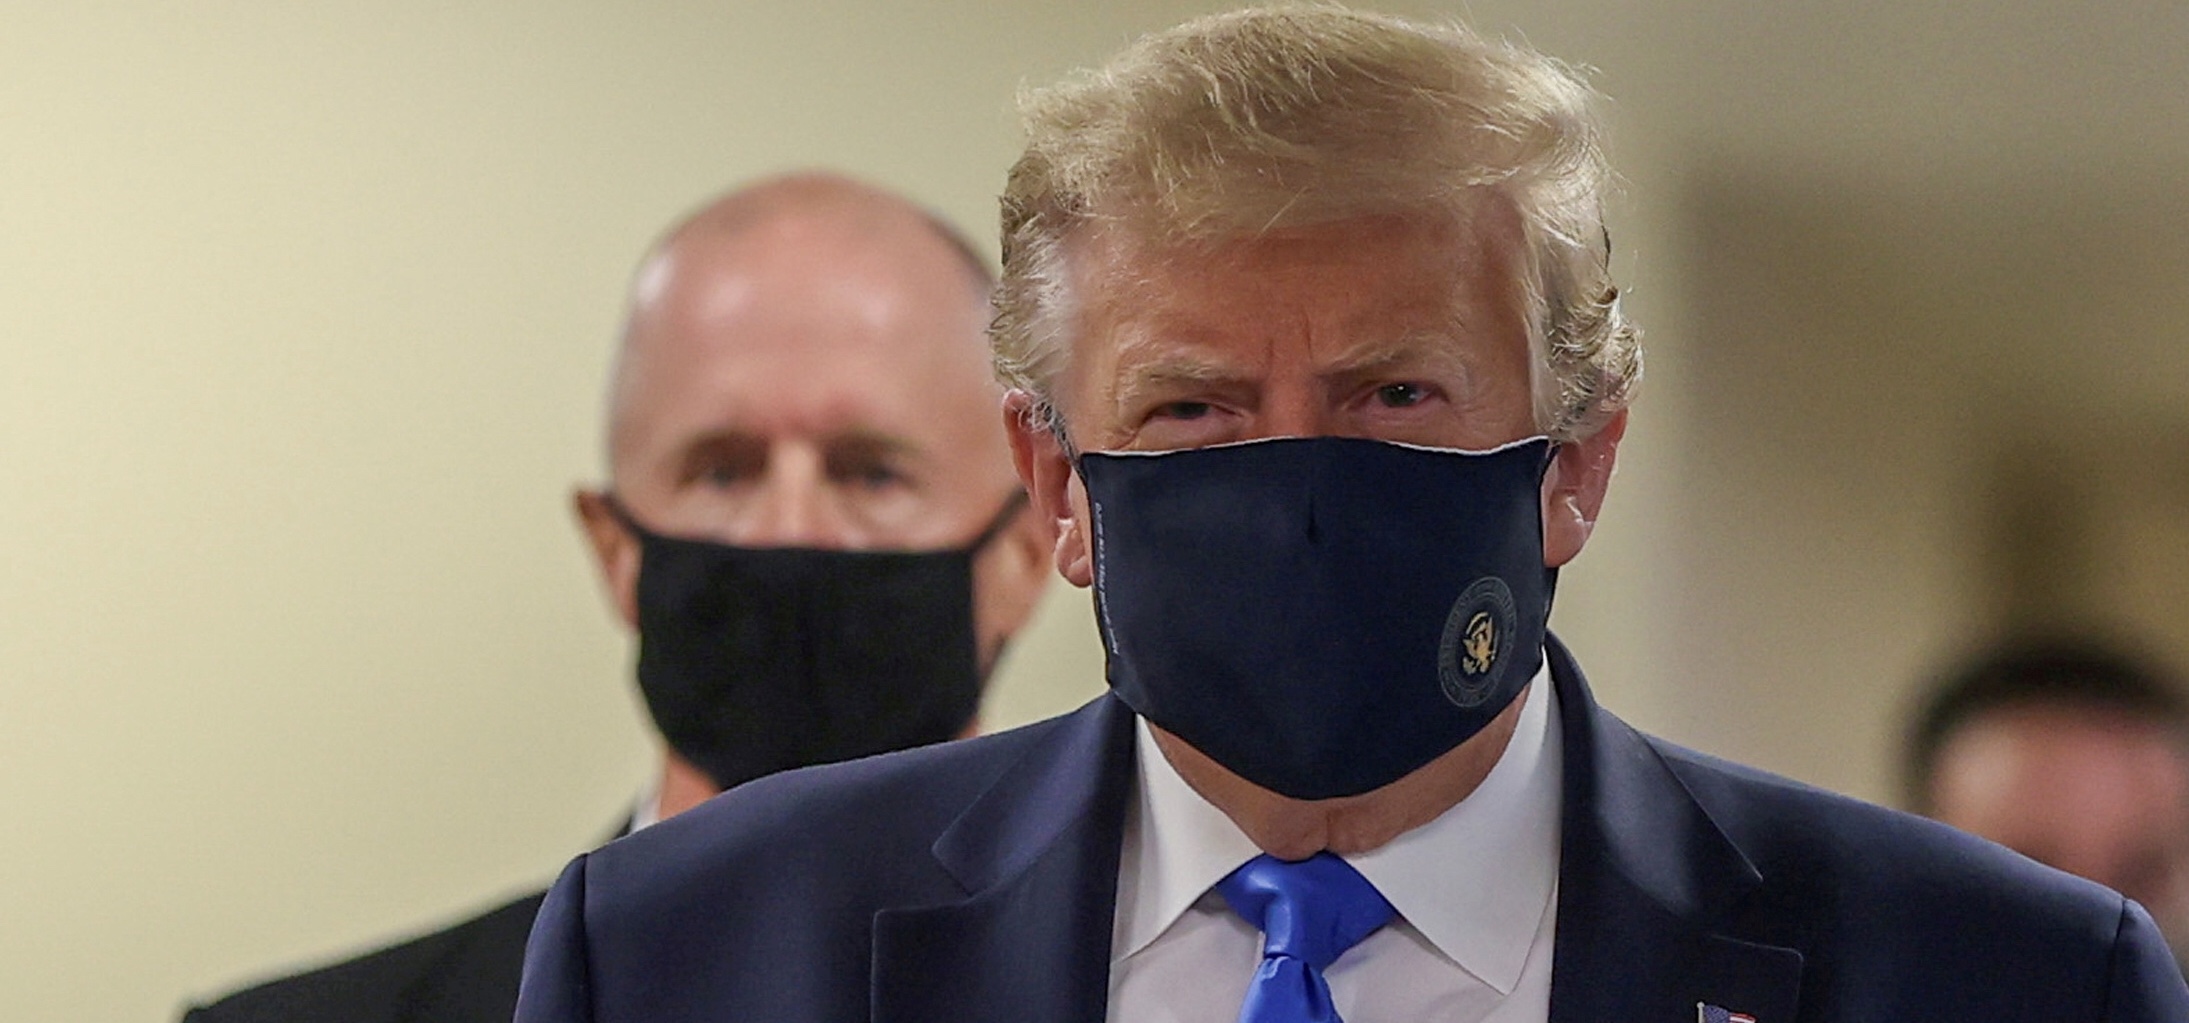 U.S. President Donald Trump wears a mask while visiting Walter Reed National Military Medical Center in Bethesda, Maryland, U.S., July 11, 2020. REUTERS/Tasos Katopodis TPX IMAGES OF THE DAY